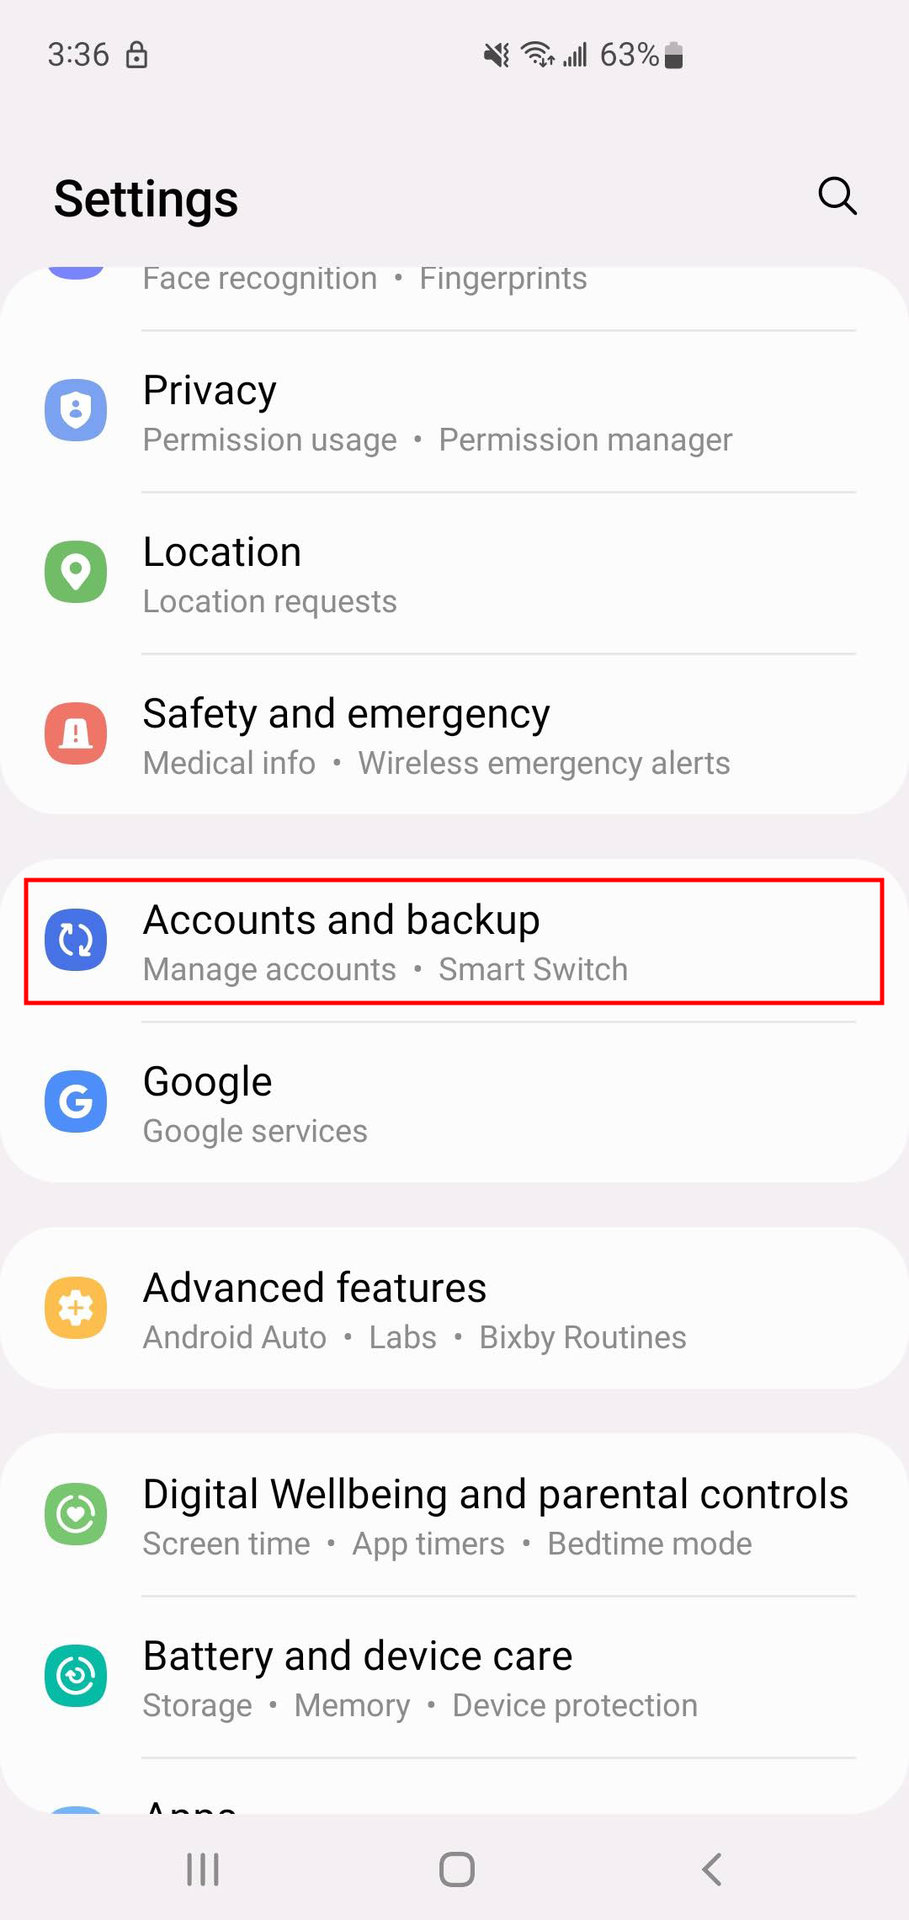 How to use Smart Switch to transfer photos from iPhone to Samsung (1)